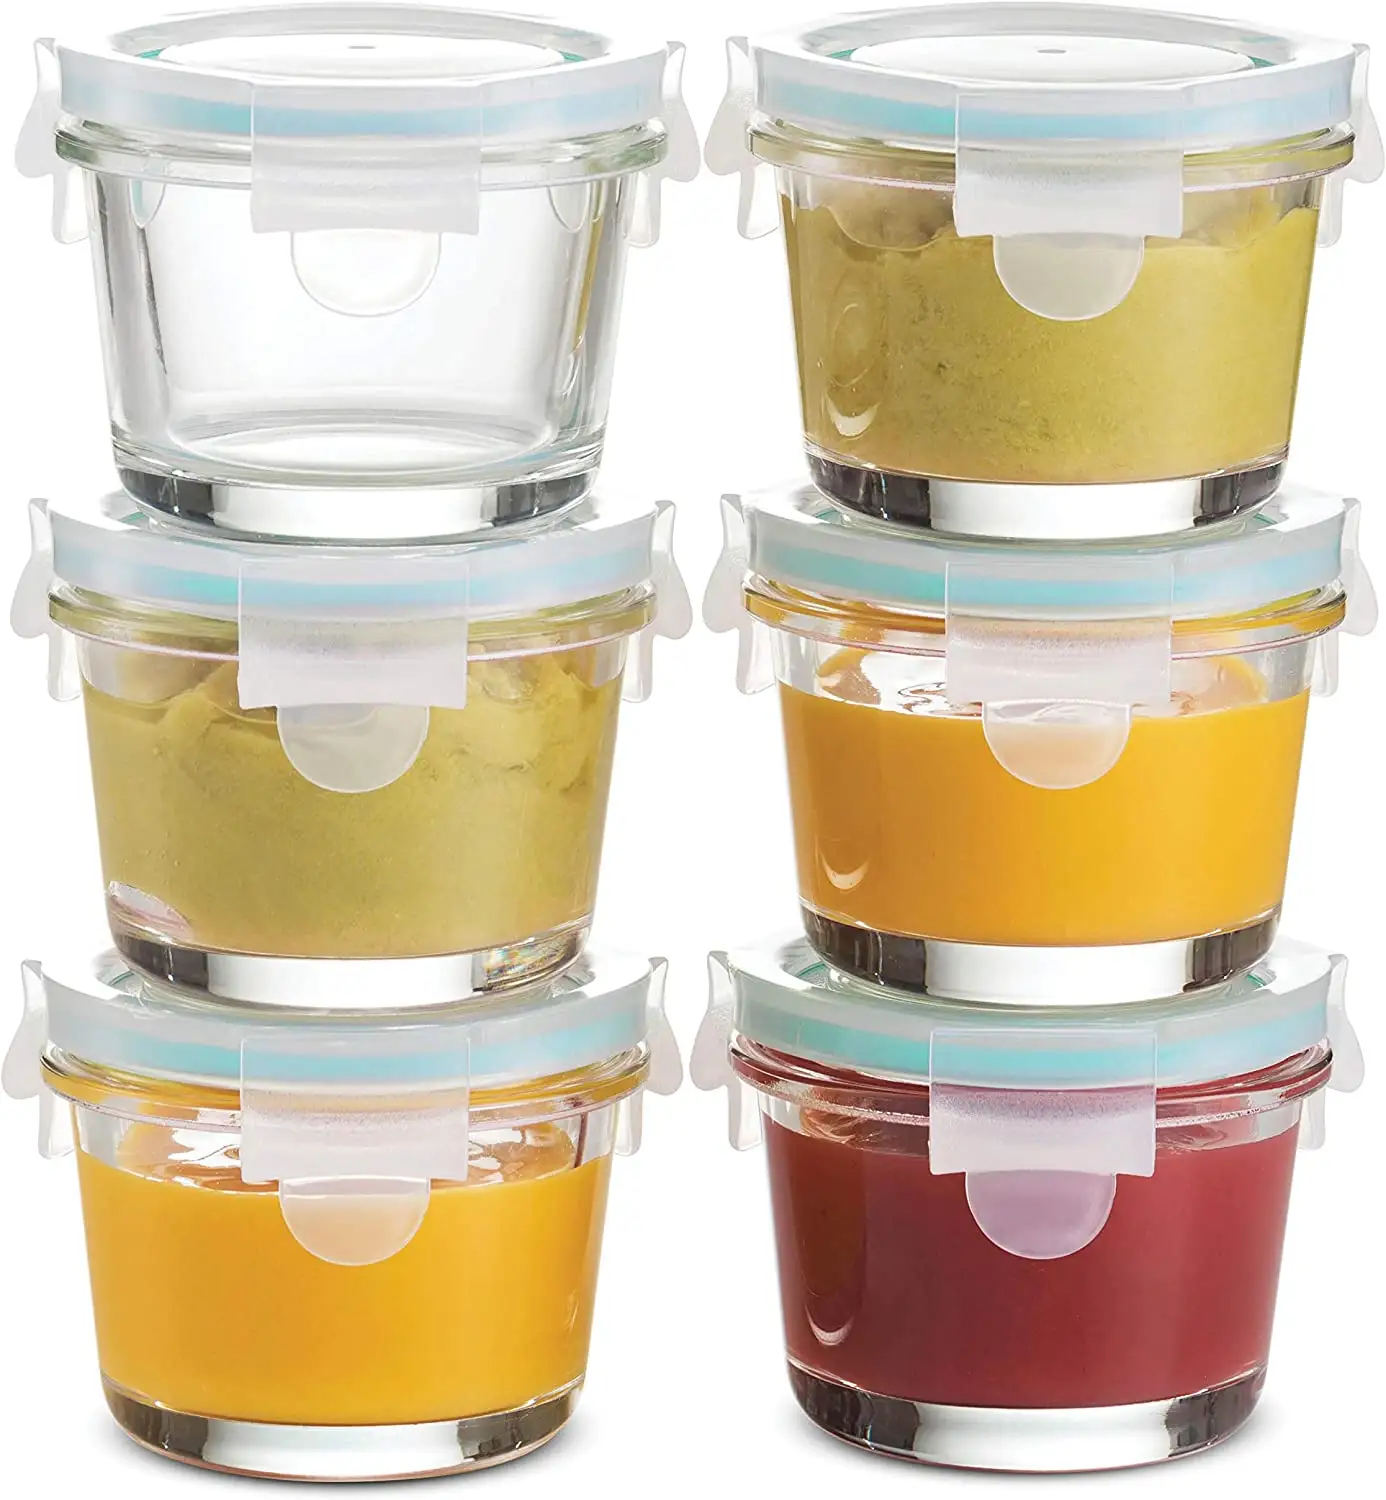 FineDine Glass Meal Prep Containers with Lids Set of 6 Round 4 Oz Containers Airtight Leakproof Microwave and Dishwasher Saf